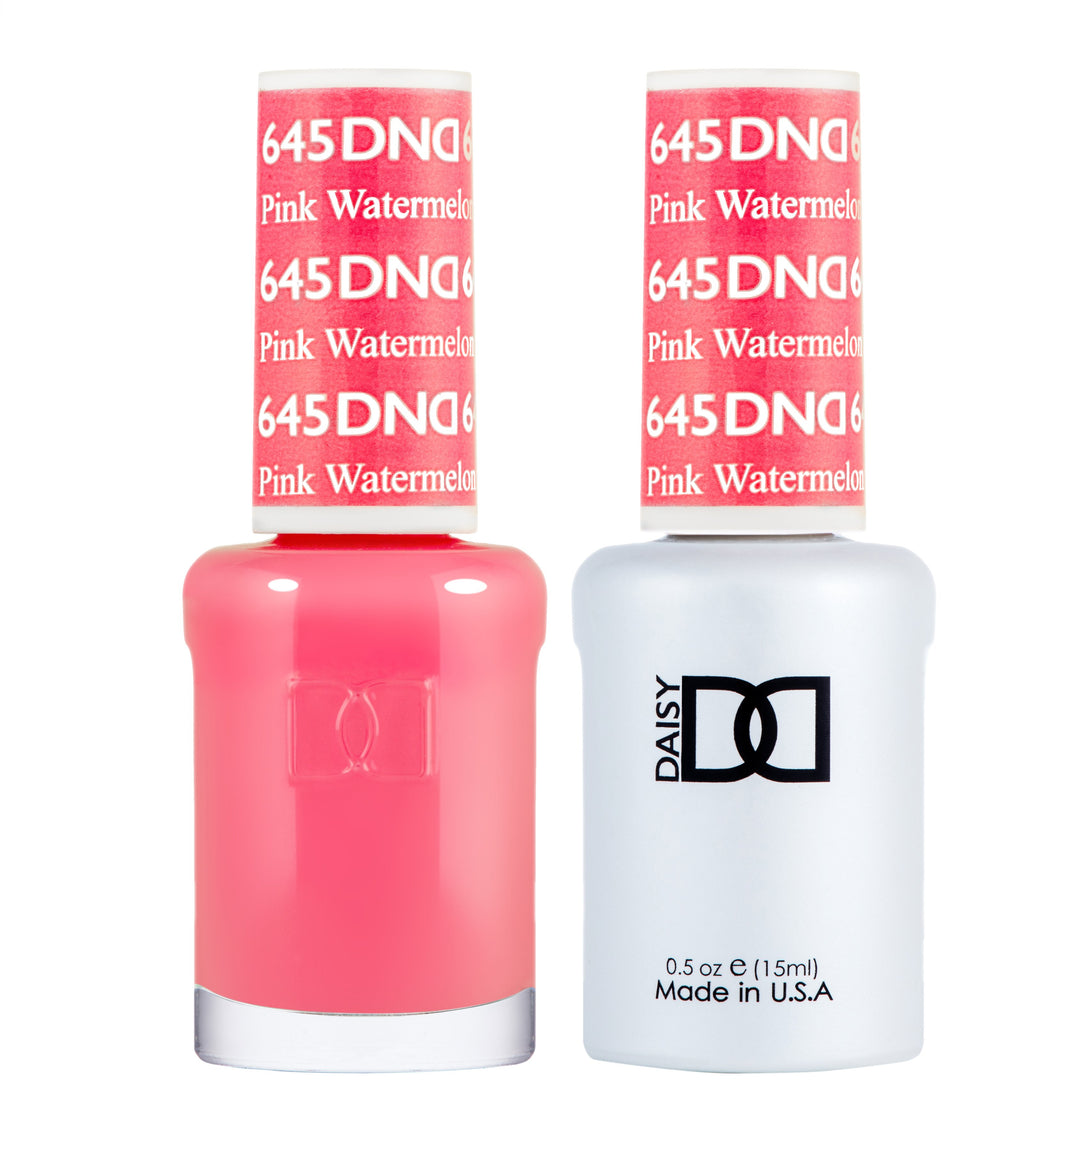 DND DUO Nail Lacquer and UV|LED Gel Polish Pink Watermelon 645 (2 x 15ml)